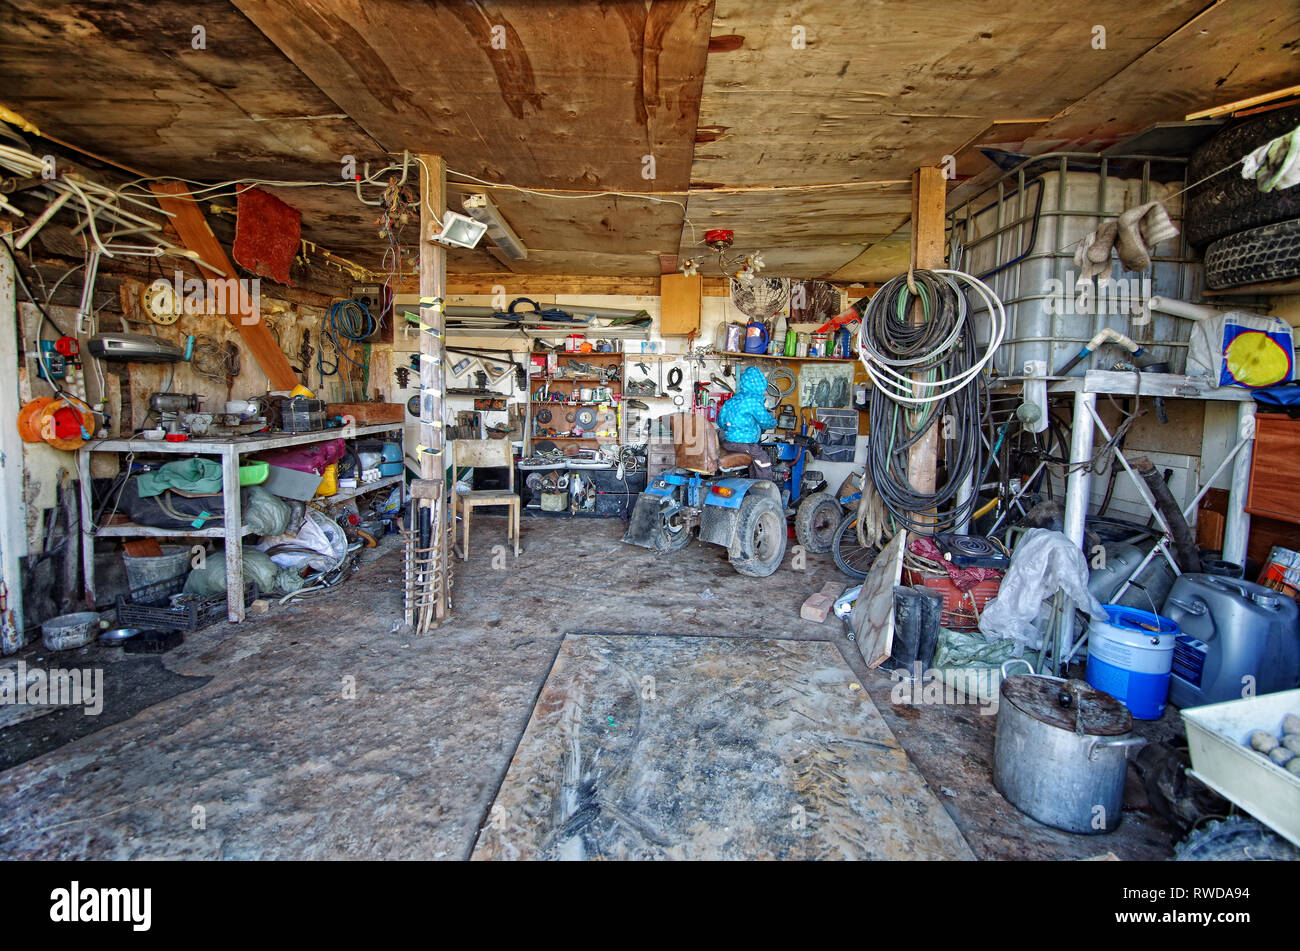 Inside a messy and cluttered garage shed with tools, cans, garden equipment in organised chaos Stock Photo